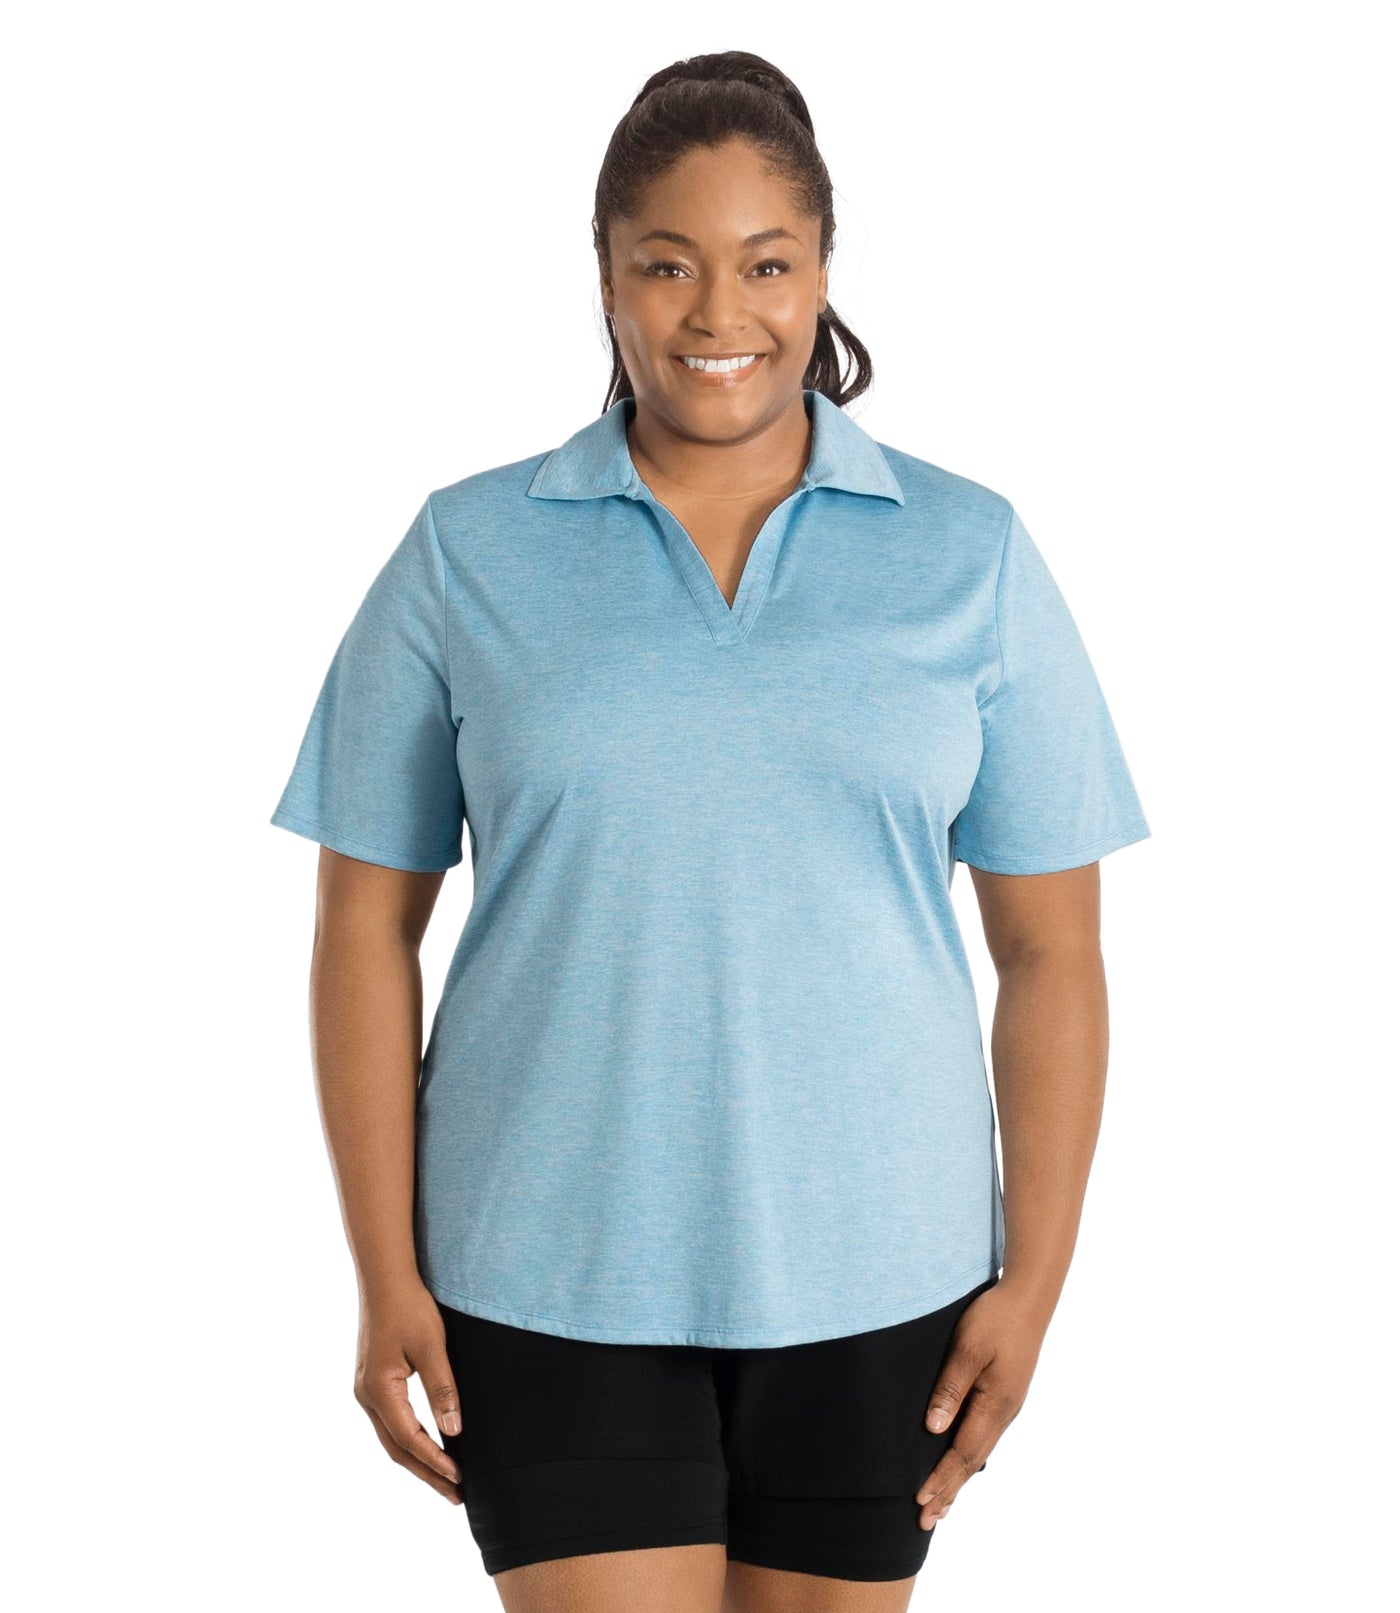 Plus size woman wearing JunoActive's SunLite Johnny Collar Top in heather light blue facing front.